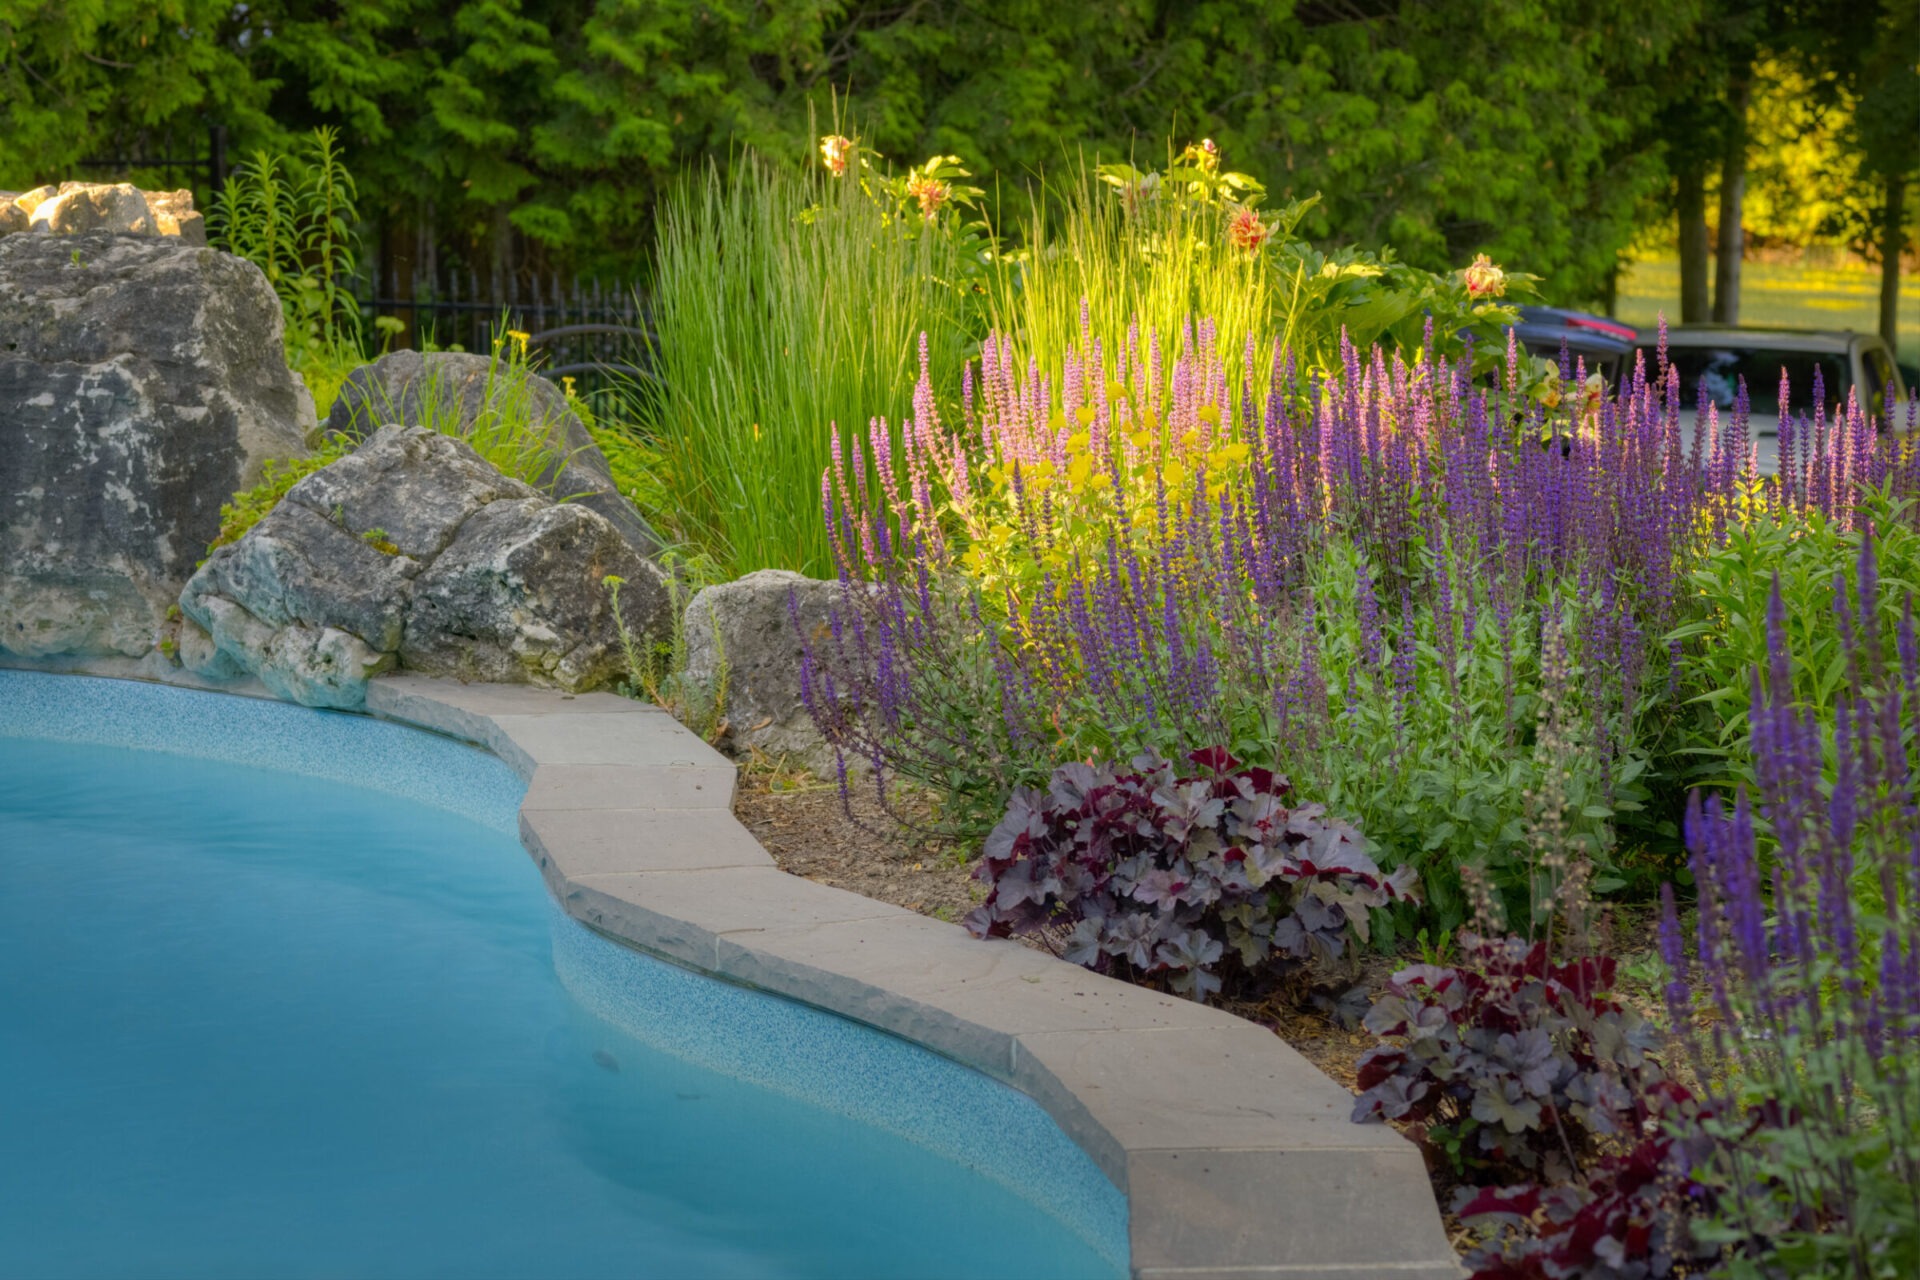 A tranquil backyard garden with lush flowering plants by a serene pool, featuring rocks, purple blossoms, and verdant foliage in soft evening light.